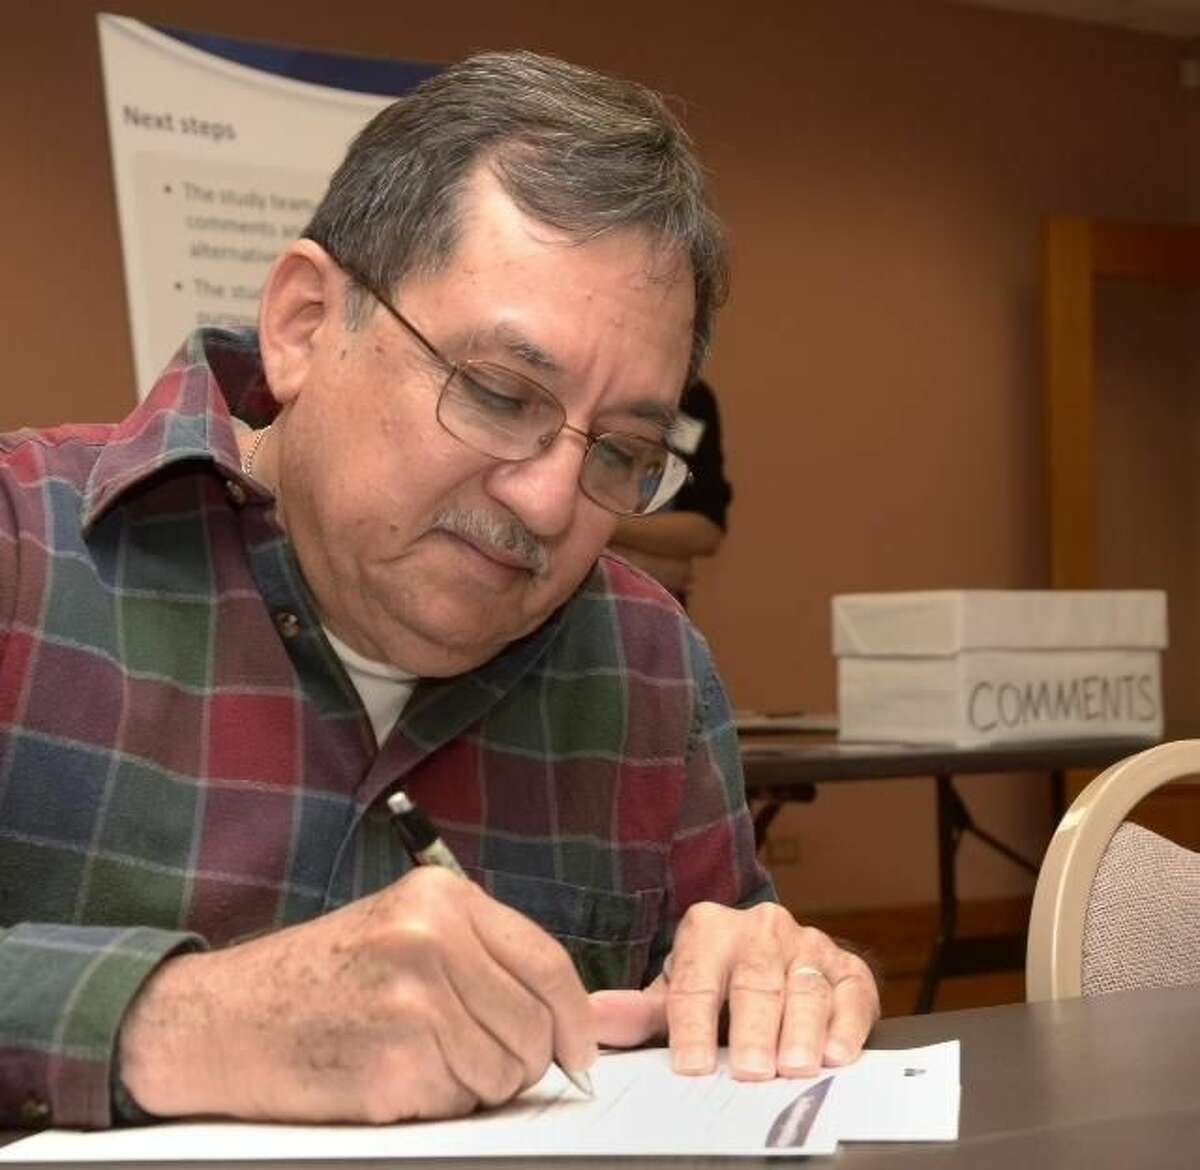 Laredoan Juan Medina writes his comments on the proposed passenger rail line at a town hall Wednesday evening at the TxDOT offices in Laredo. Officials from the city, Nuevo Laredo as far as Monterrey, Nuevo León, Mexico, contributed to the discussion.(Photo by Cuate Santos/Laredo Morning Times)